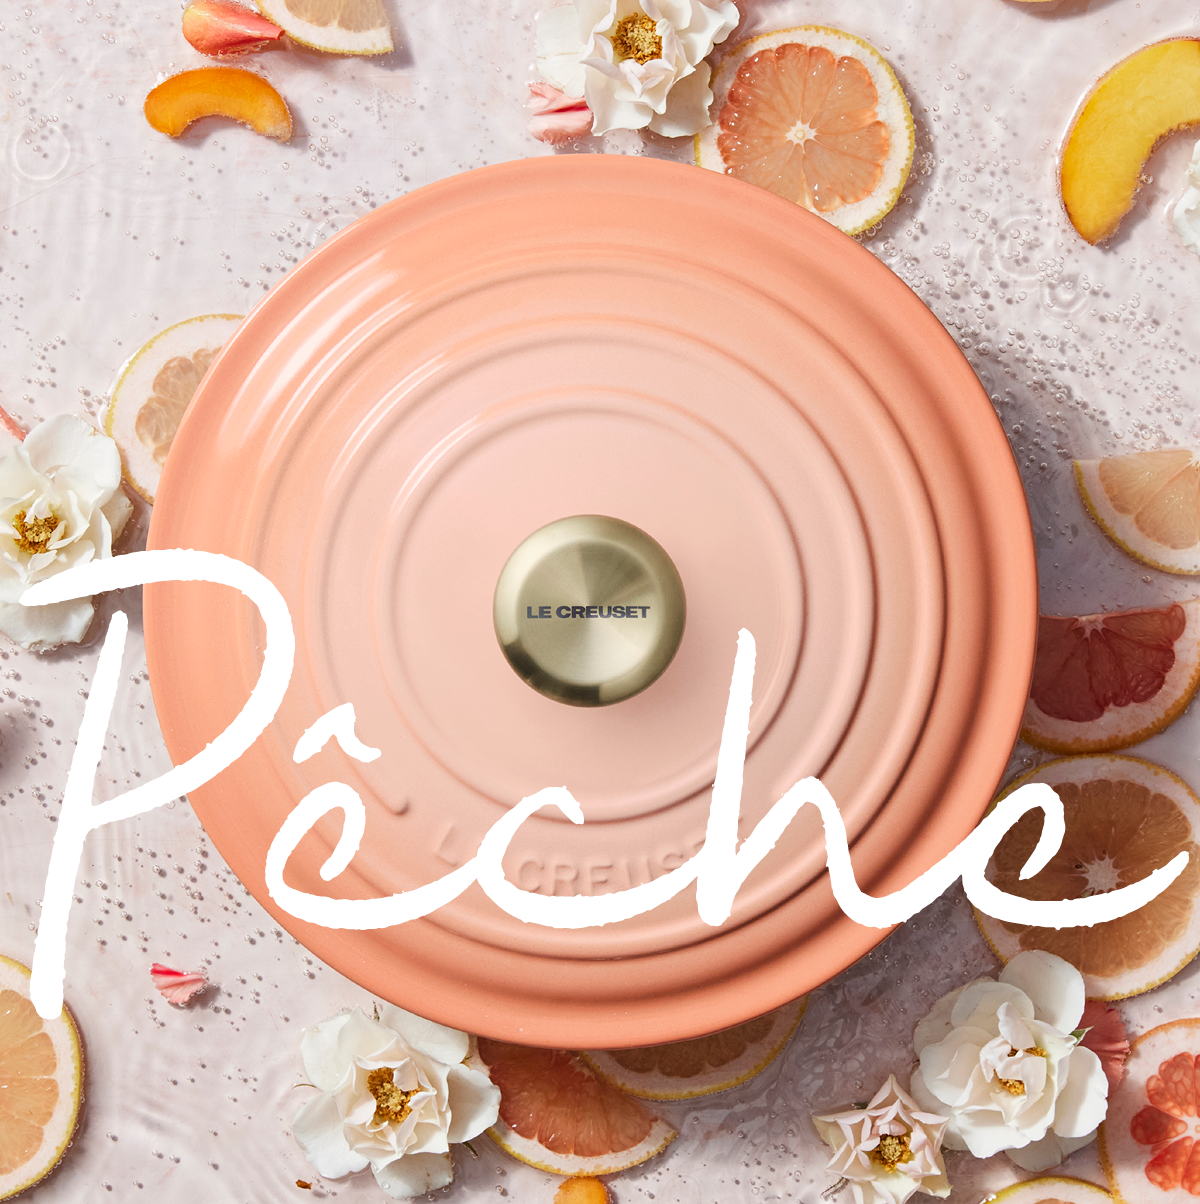 SAVE $150 on Le Creuset's NEW mom-approved color, Peche